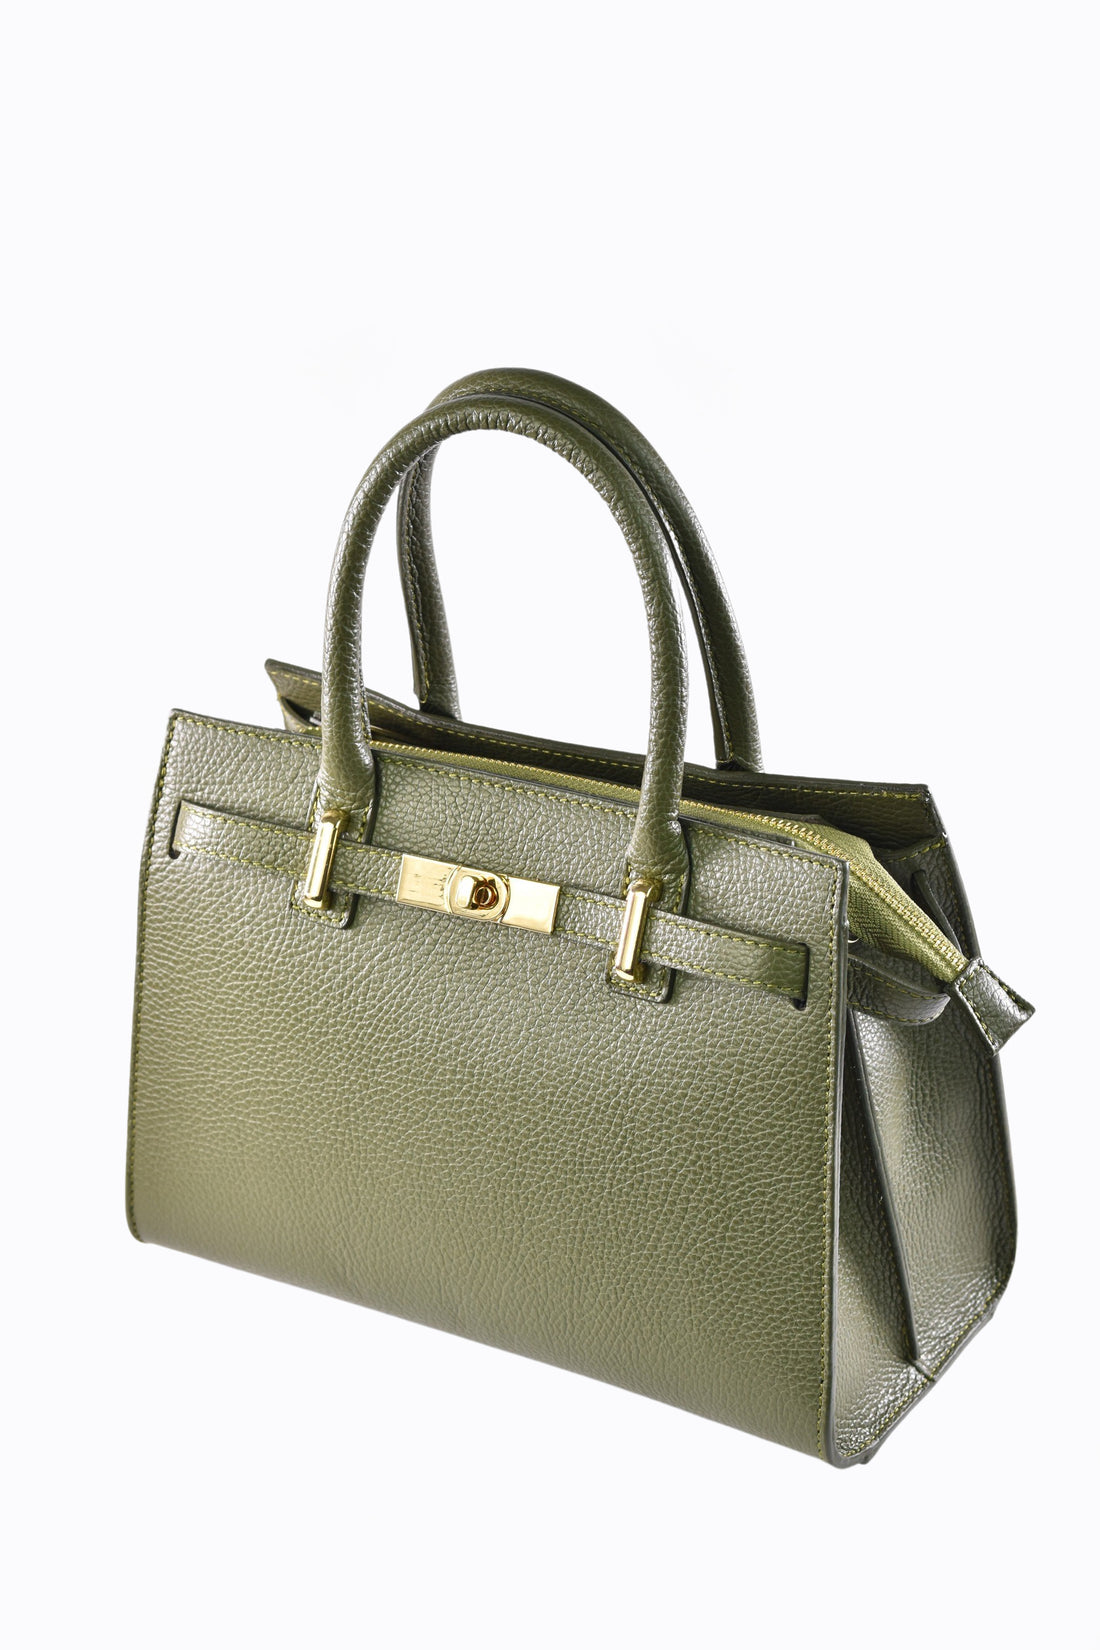 Grace bag in Olive Green Dollar leather